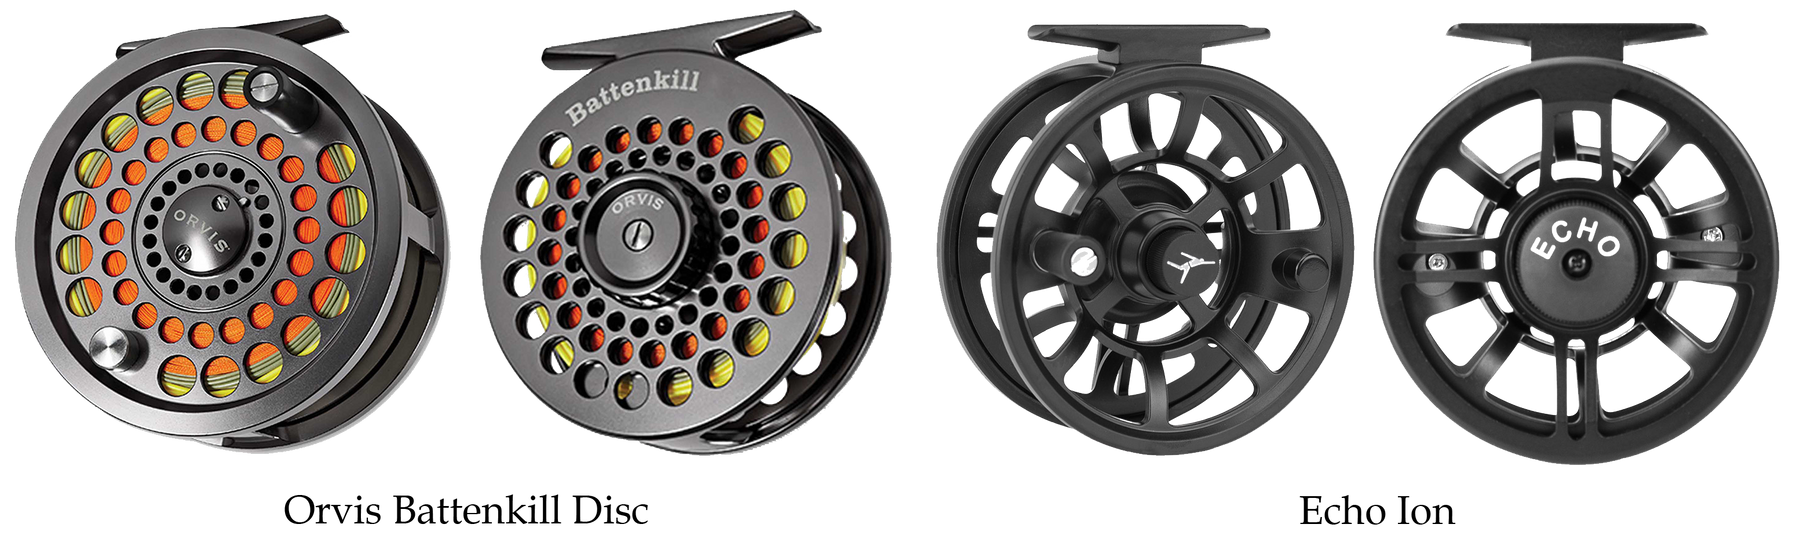 https://raftandfly.com/cdn/shop/products/Orvis_Battenkill_and_Echo_Ion_reels_1800x1800.png?v=1574052859